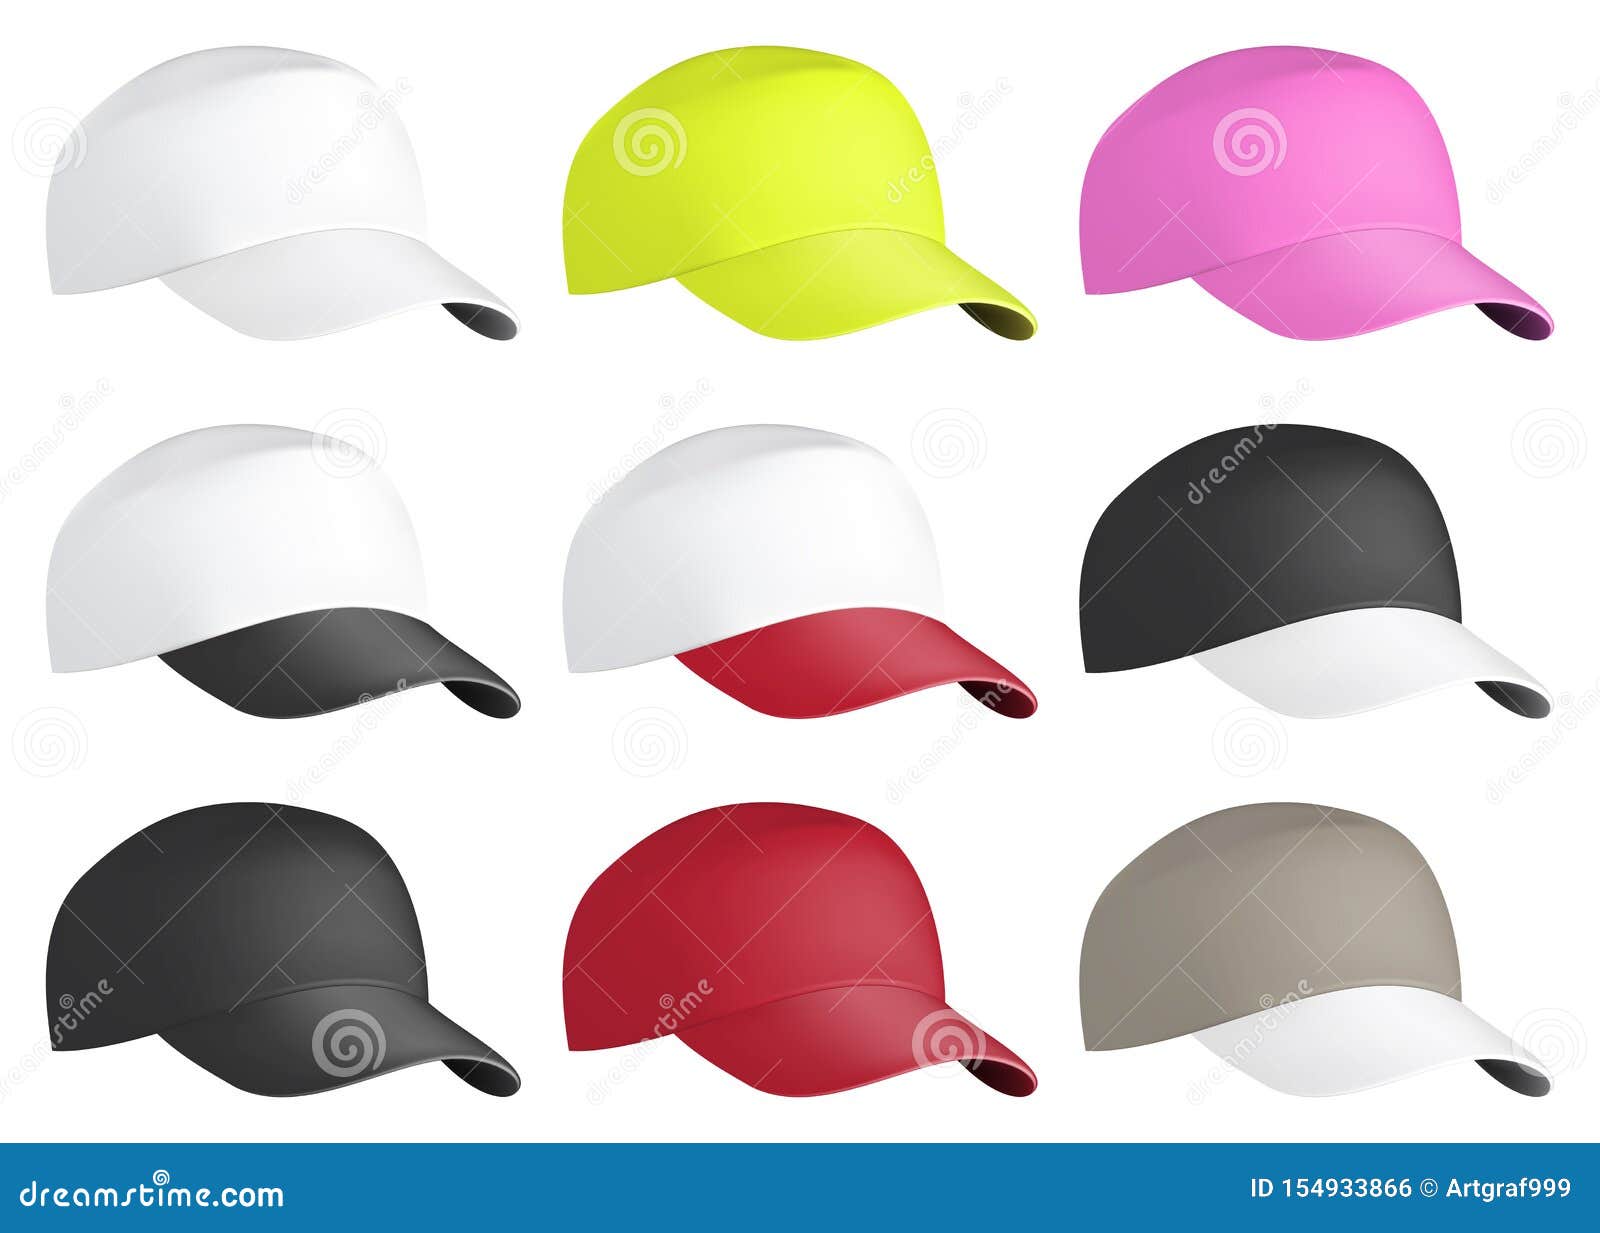 Realistic Front View Baseball Cap. Baseball Cap Set Isolated On White ...